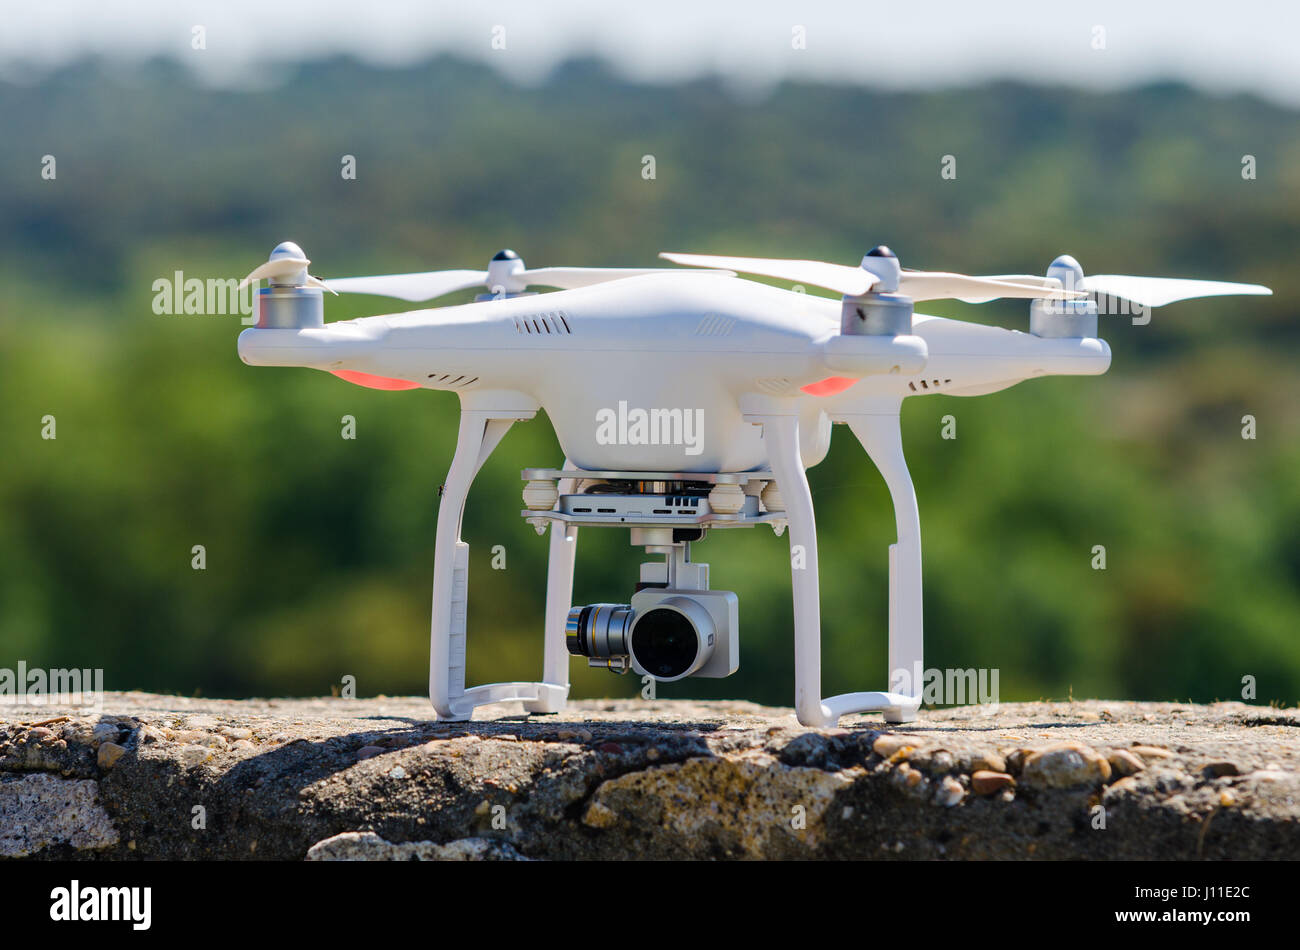 Drone landed on wall Stock Photo -